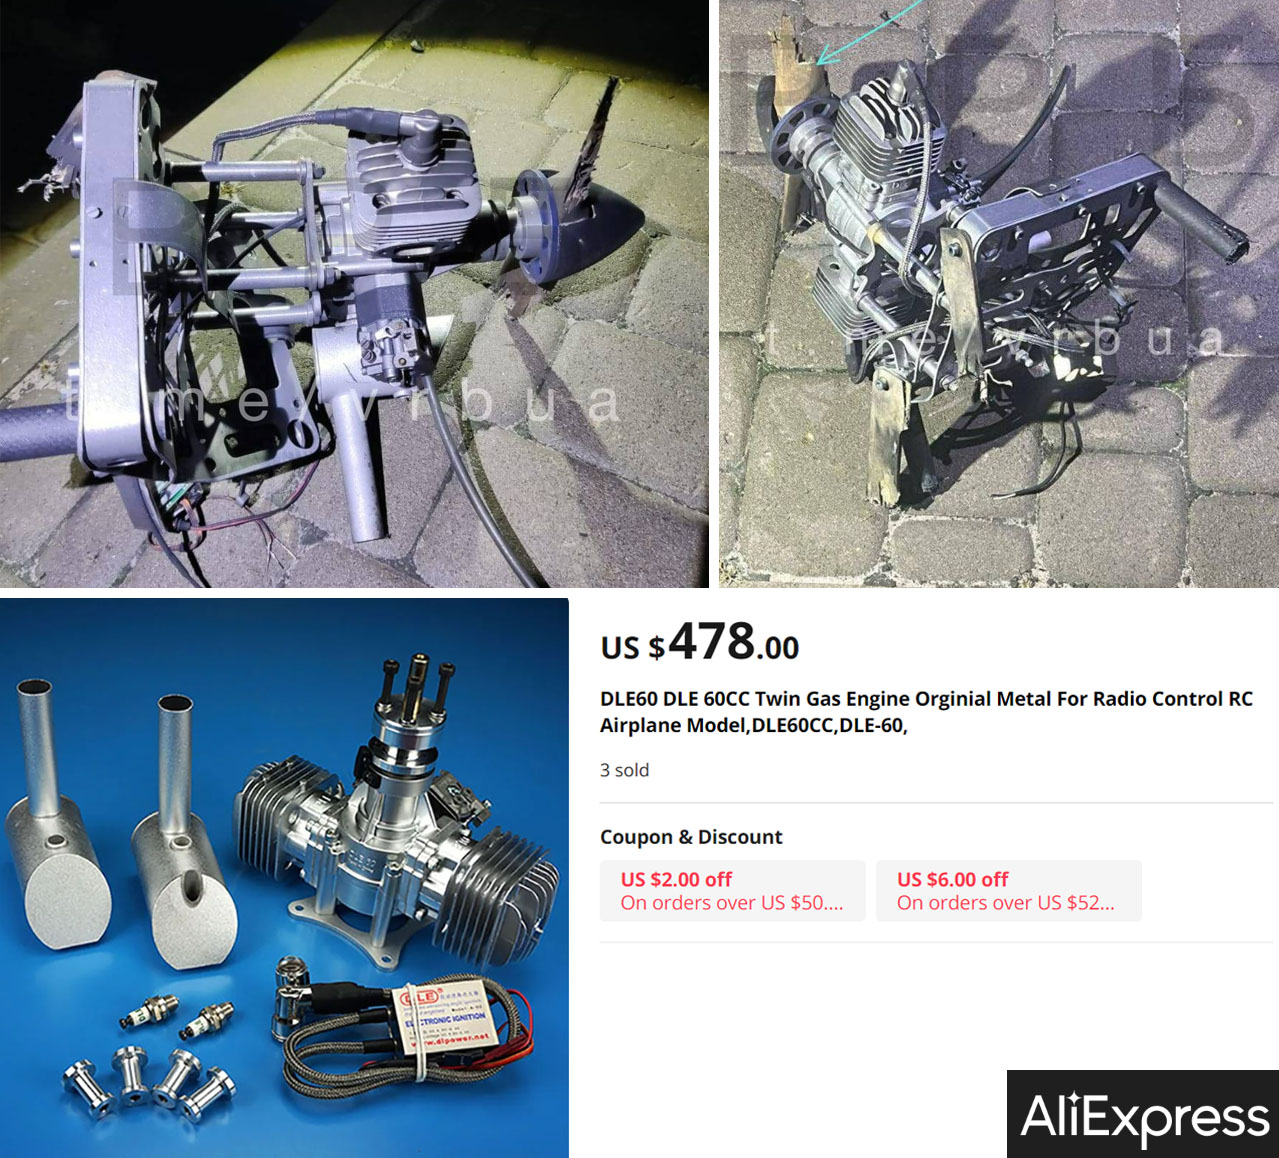 The DLE-60 engine found after an unidentified drone was shot down overnight October 23rd and the same engine in AliExpress online catalog